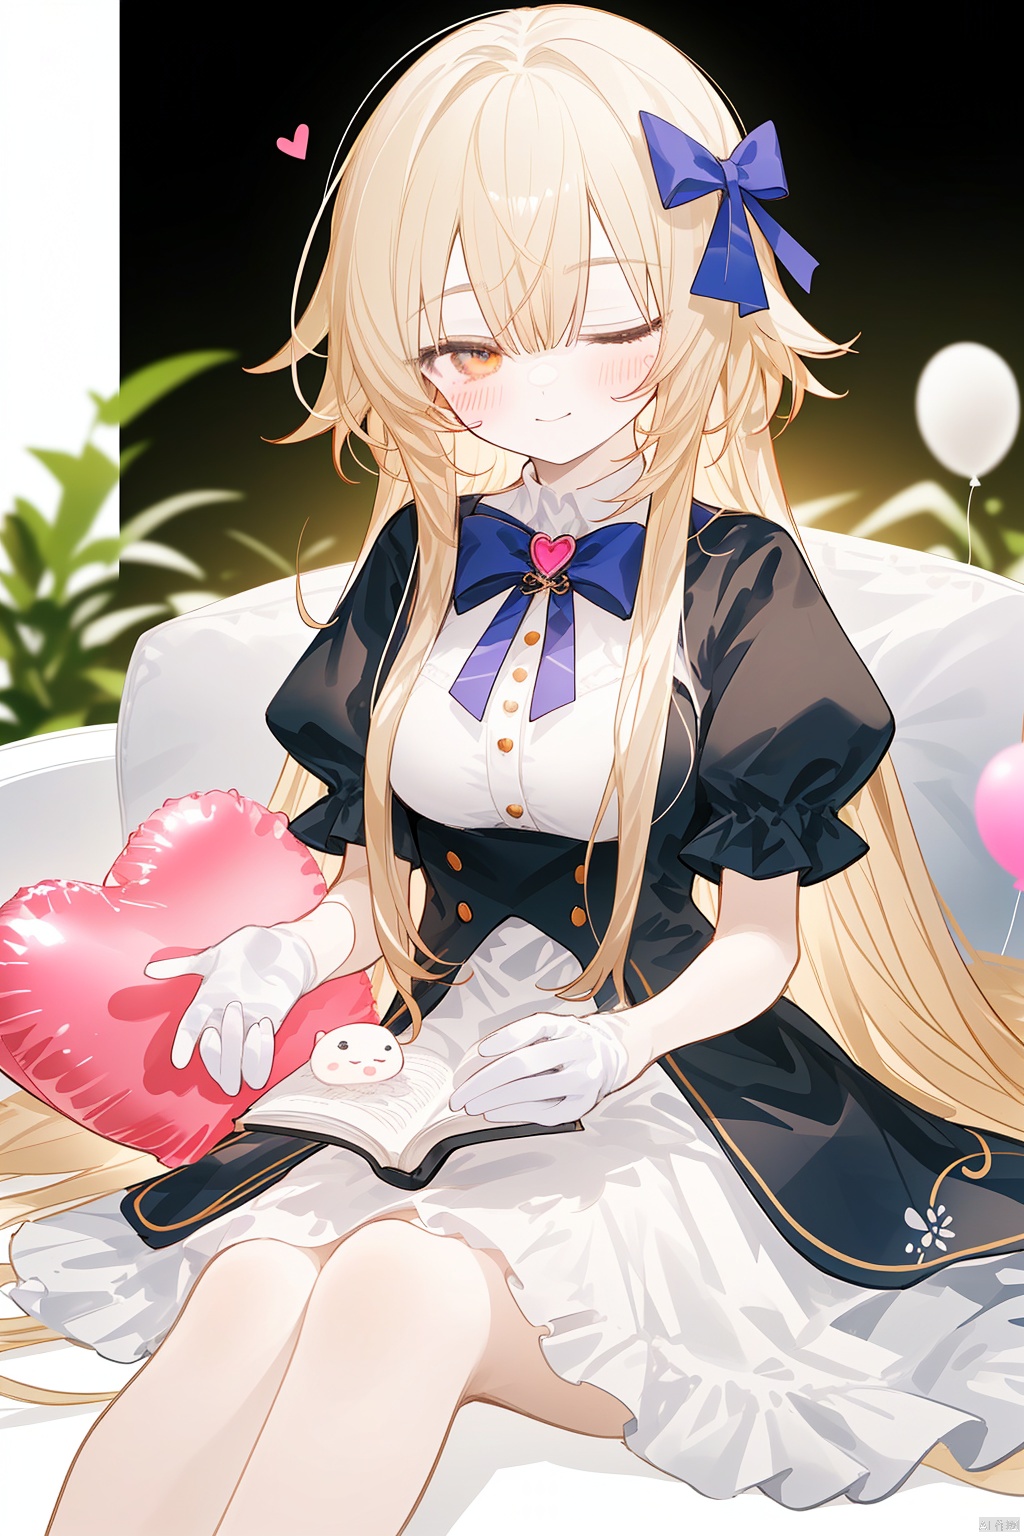  Character Features:

1girl, solo, long hair, breasts, blurry_background, blush, smileballoon, bangs, blonde_hair, blush, bow, closed_mouth, dress, eyebrows_visible_through_hair, frills, gloves, heart, heart_balloon, heart_pillow, holding, long_hair, looking_at_viewer, one_eye_closed, pink_bow,
Color Suggestions:

Use soft, warm tones like pink, beige, or light purple to create a warm ambiance for the character.

Apply light color contrasts and layers in clothing and background, such as pale blue or off-white, to highlight the figure.

The light and shadow should be soft and natural, simulating natural light to achieve a warm and inviting effect.

Background Suggestions:

Keep it simple, blurry background, using light-toned, undisturbed backgrounds or natural elements like distant hills or gently fluttering curtains to complement the character's tranquility and softness.

Consider adding a few faint flowers or delicate plant details to enhance the harmony between the character and her environment.


Posture and Movement:



Relaxed and natural posture, either sitting or standing, with gentle movements such as lightly touching a flower, playing with a cat, or quietly reading a book.

Ensure smooth and graceful hand lines to convey the character's gentleness and delicacy.


I hope these suggestions inspire you as you create your gentle female character. Remember to relax and enjoy the process, infusing the character with your own emotions and stories., nai3